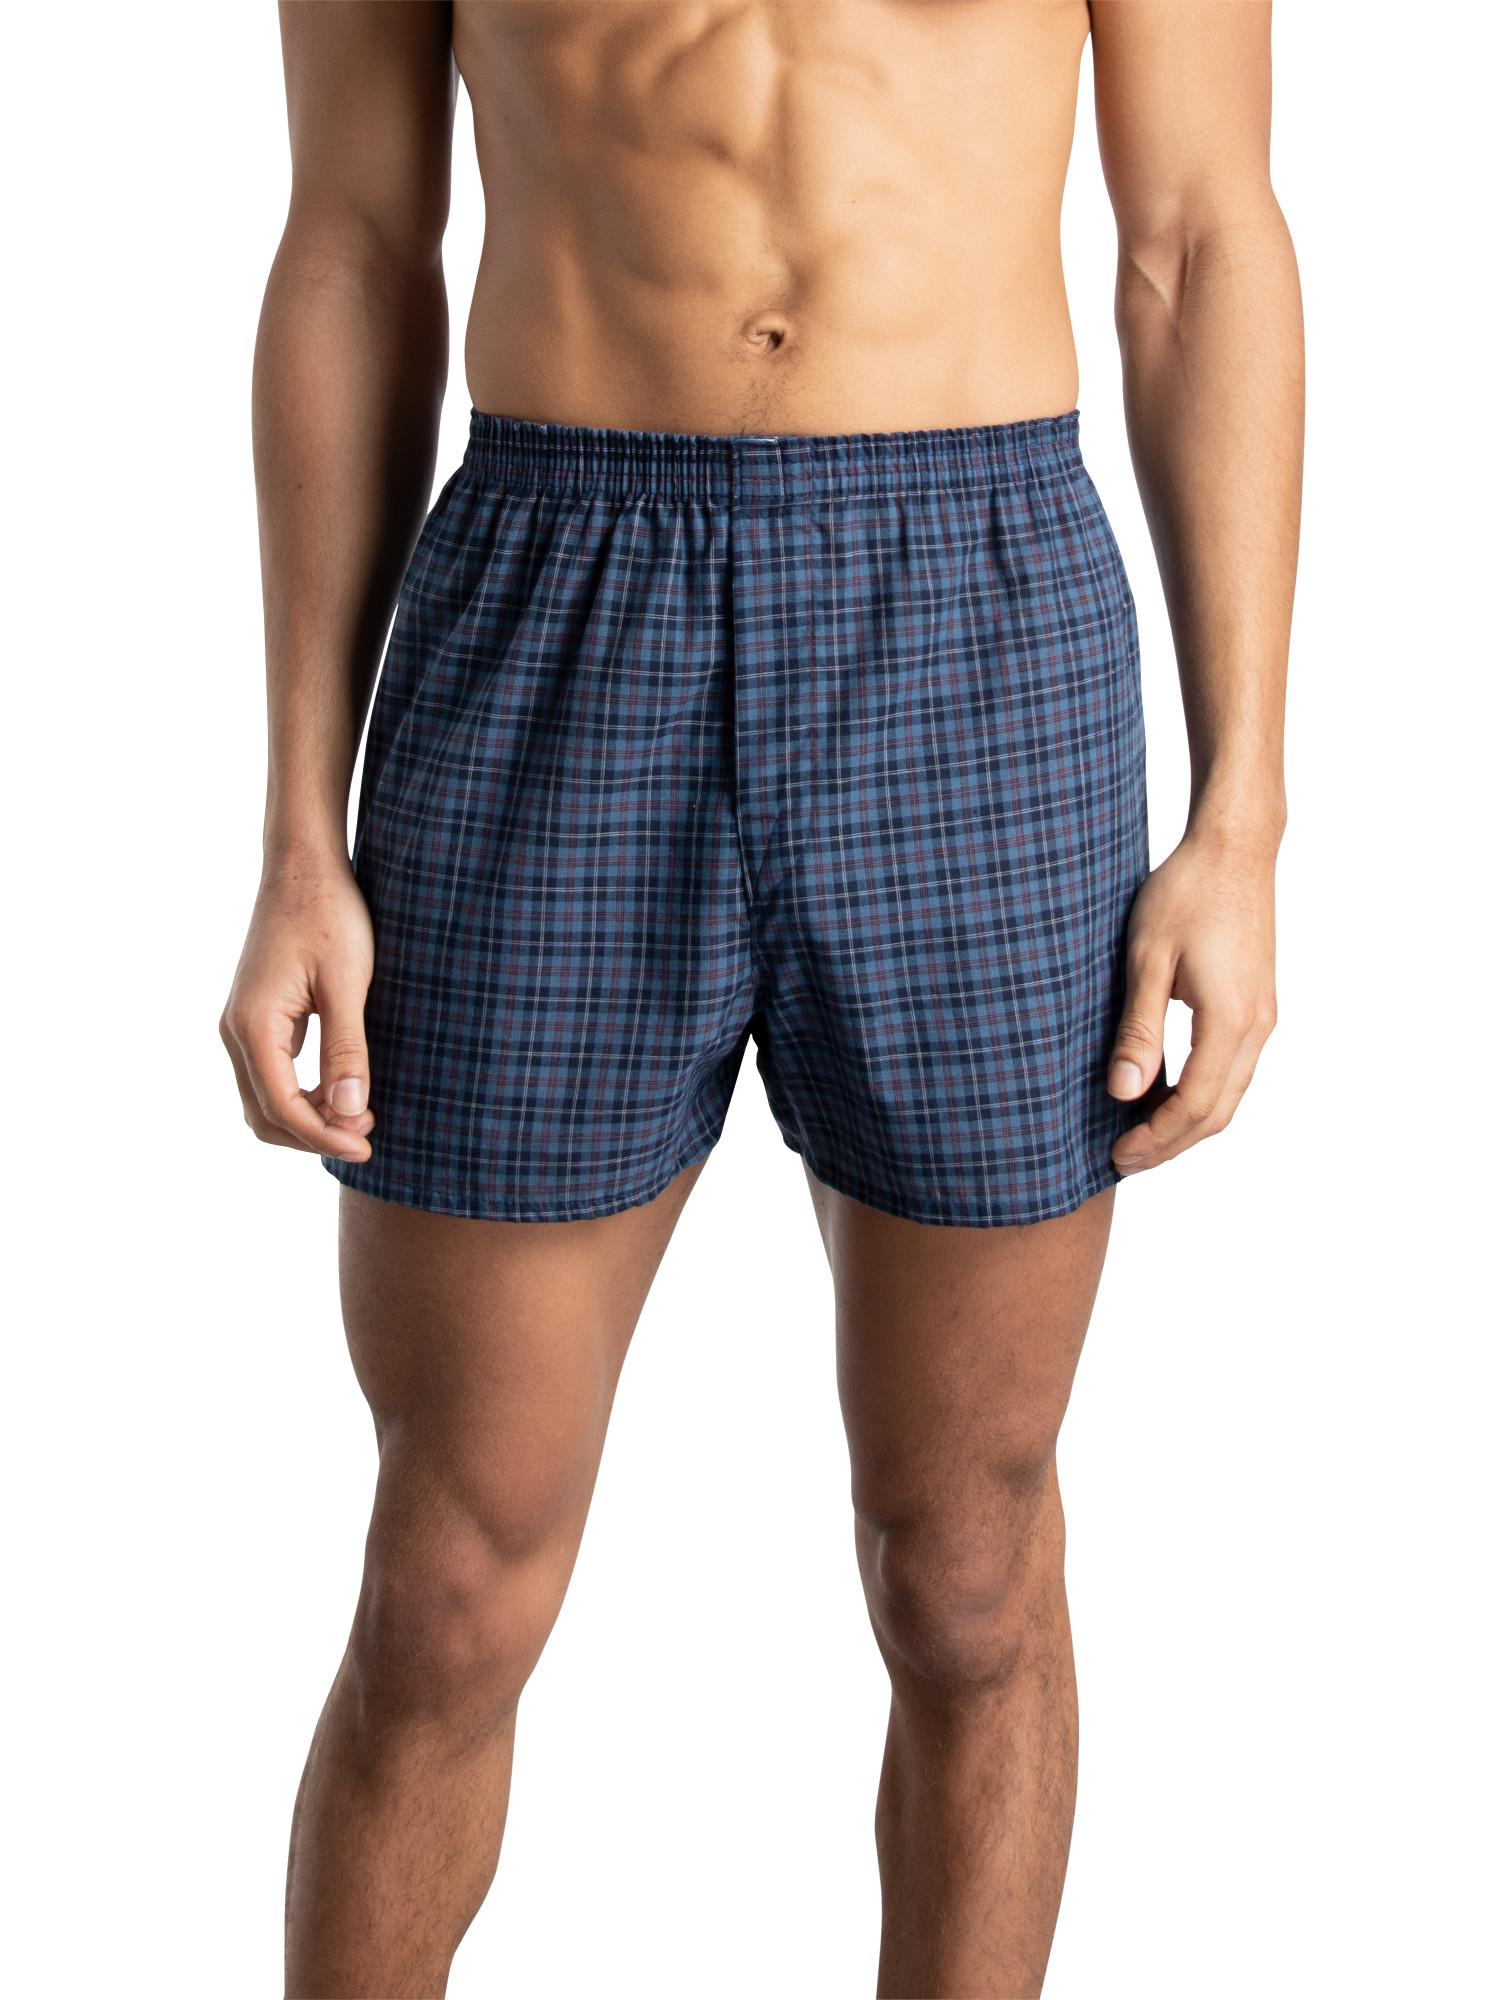 Fruit of the Loom Men's Woven Boxers, 6 Pack - image 5 of 12